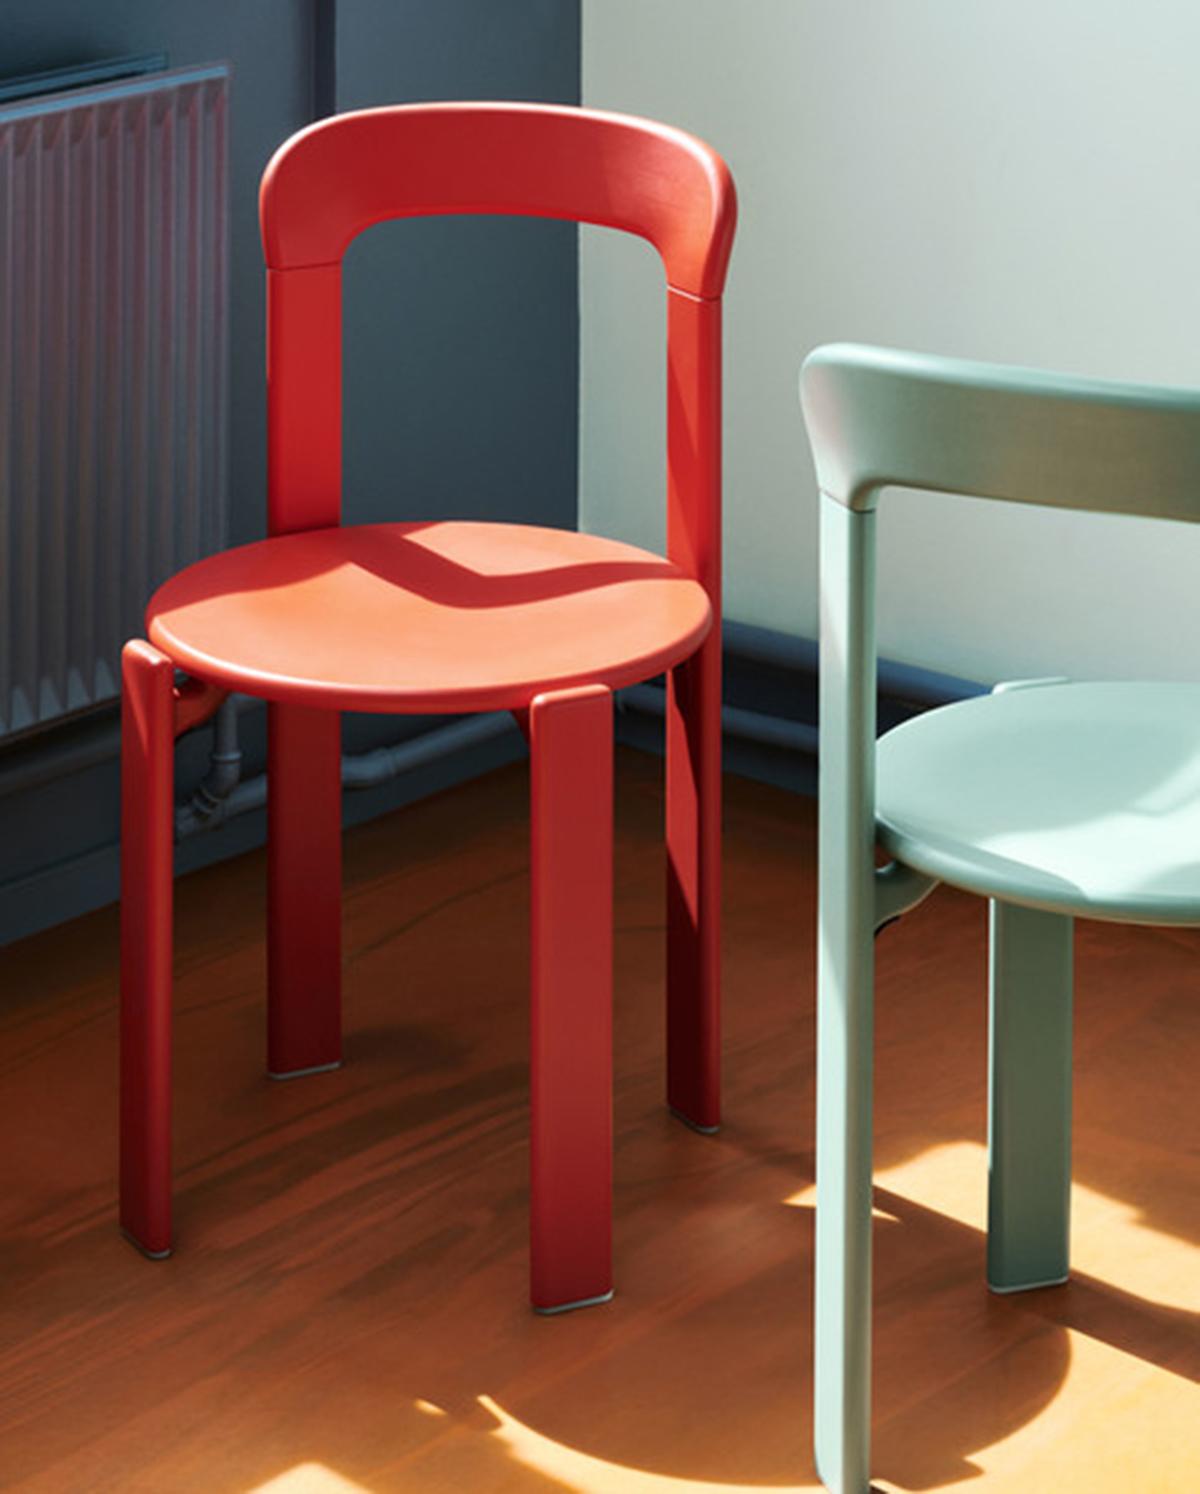 Based on the original Rey Collection designed by Swiss designer Bruno Rey in 1971, HAY has teamed up with Dietiker to relaunch the Rey Chair. With its distinctively rounded edges and curved backrest, it was the first chair to be patented with